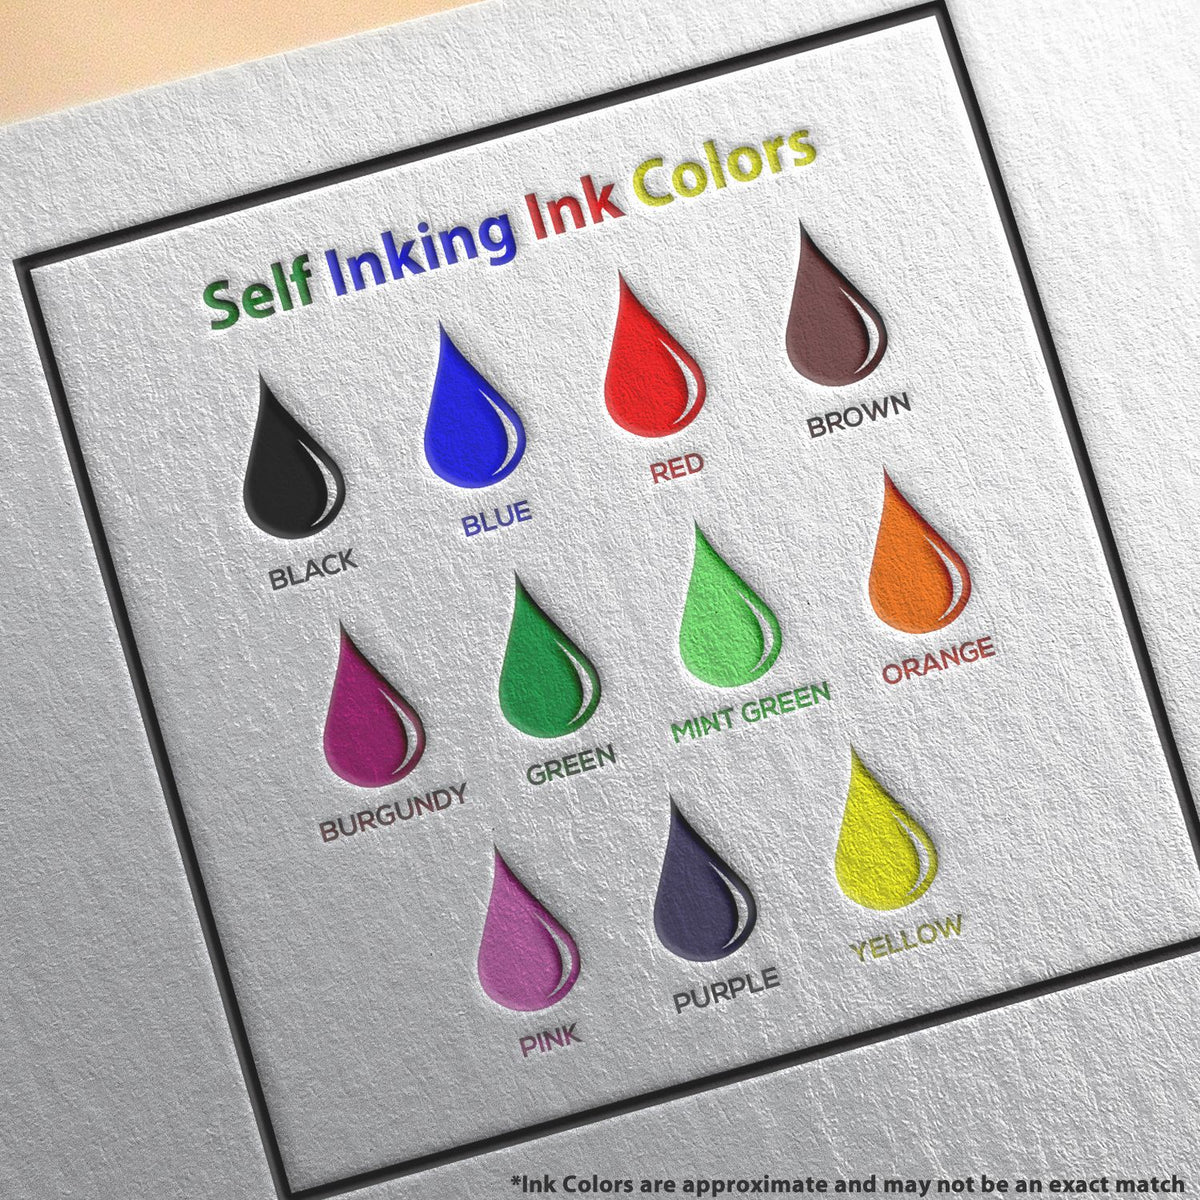 A picture showing the different ink colors or hues available for the Self-Inking Rectangular Puerto Rico Notary Stamp product.